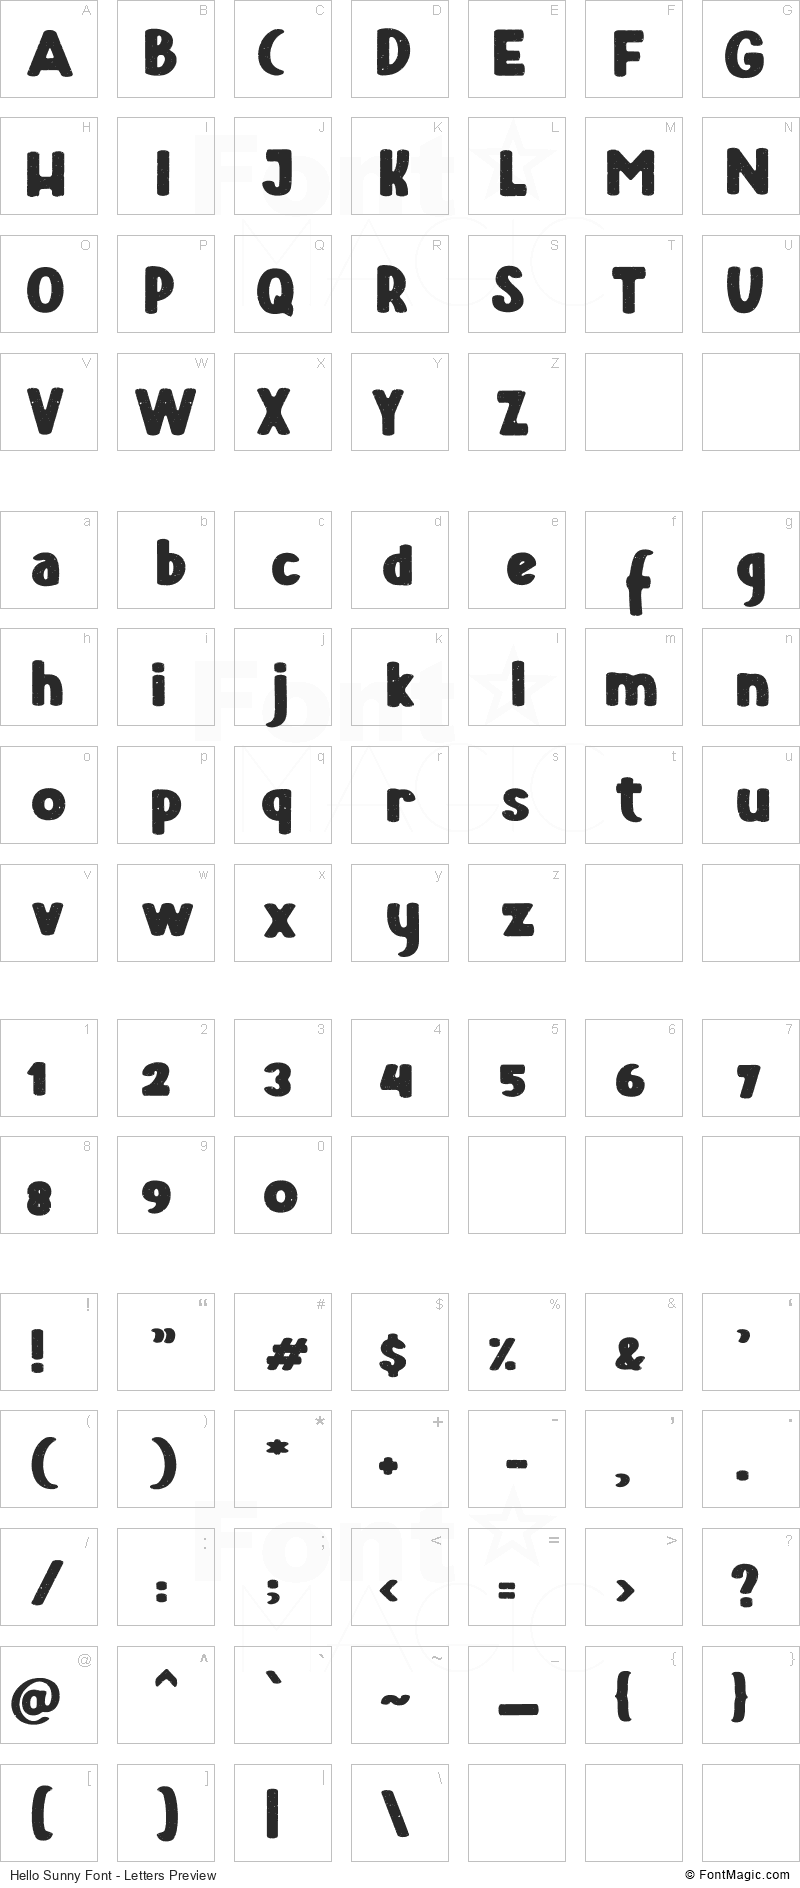 Hello Sunny Font - All Latters Preview Chart